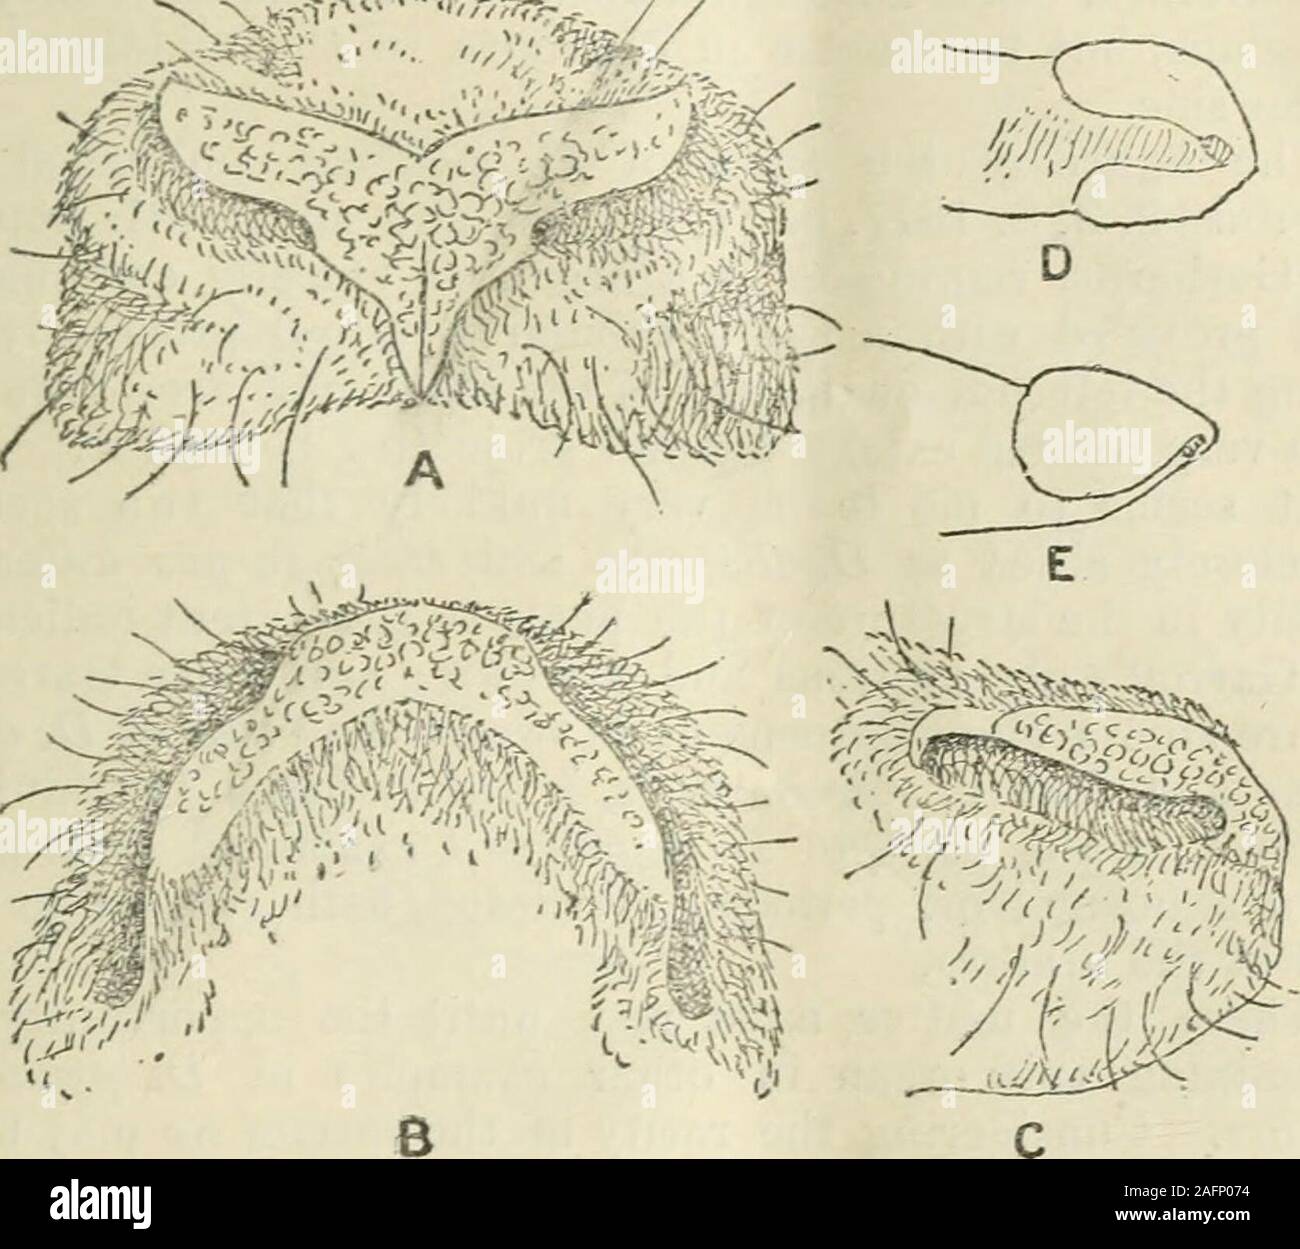 The annals and magazine of natural history : zoology, botany, and geology.  much reduced, butis broad between the narrowed inner ends of the  nostrils;beneath the septum it is continued down the